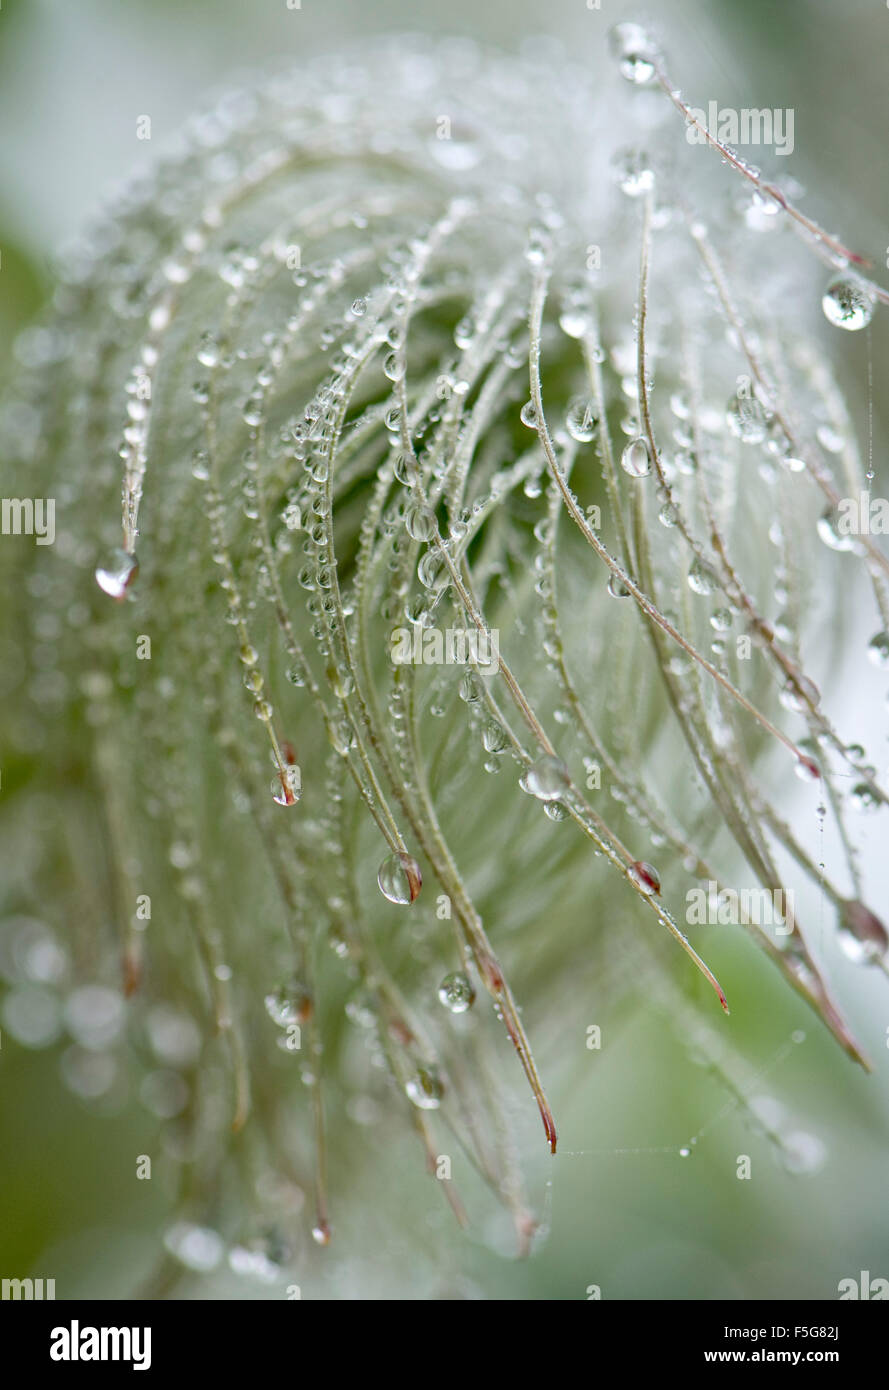 Fog or mist droplets condensed on the elements of the seed head of Clematis tangutica in autumn Stock Photo